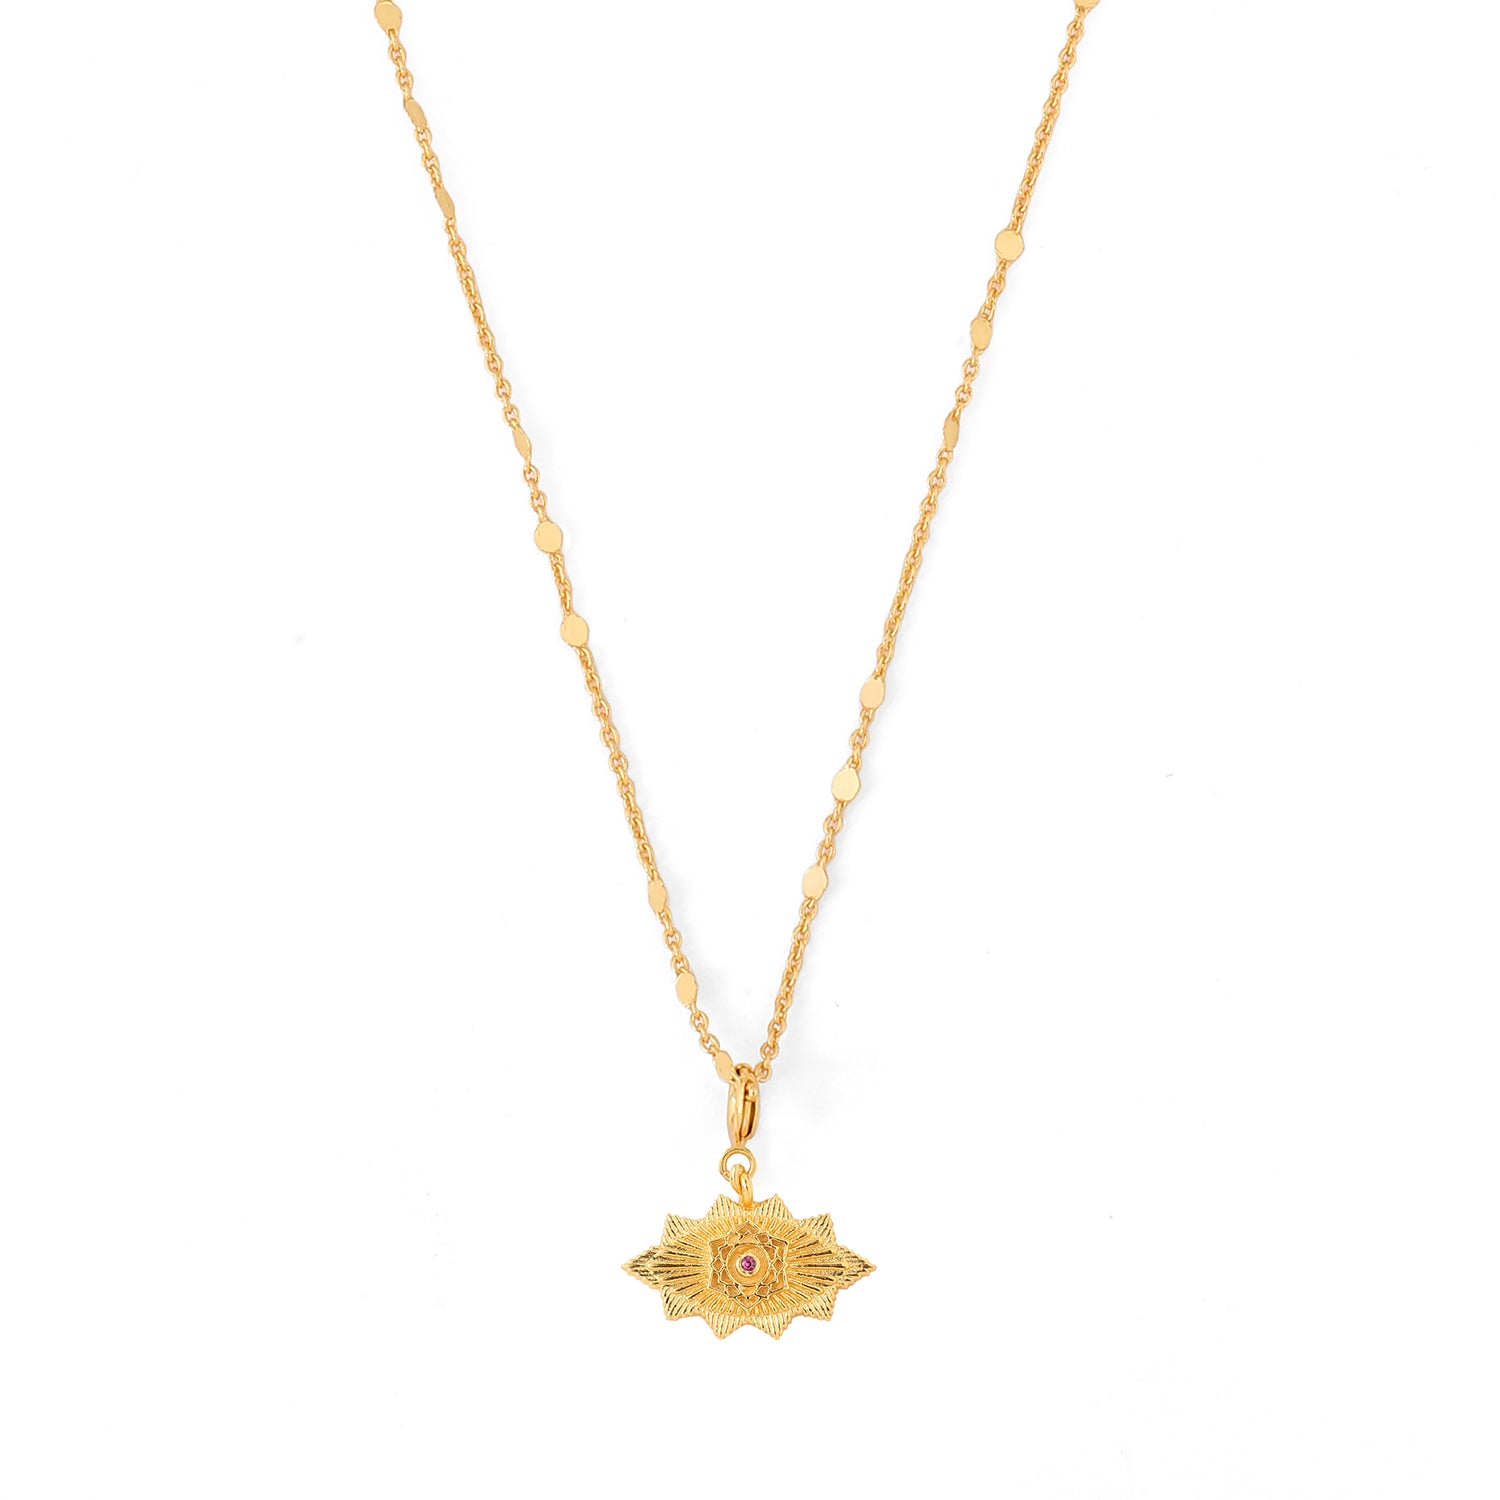 CROWN CHAKRA CHARM NECKLACE